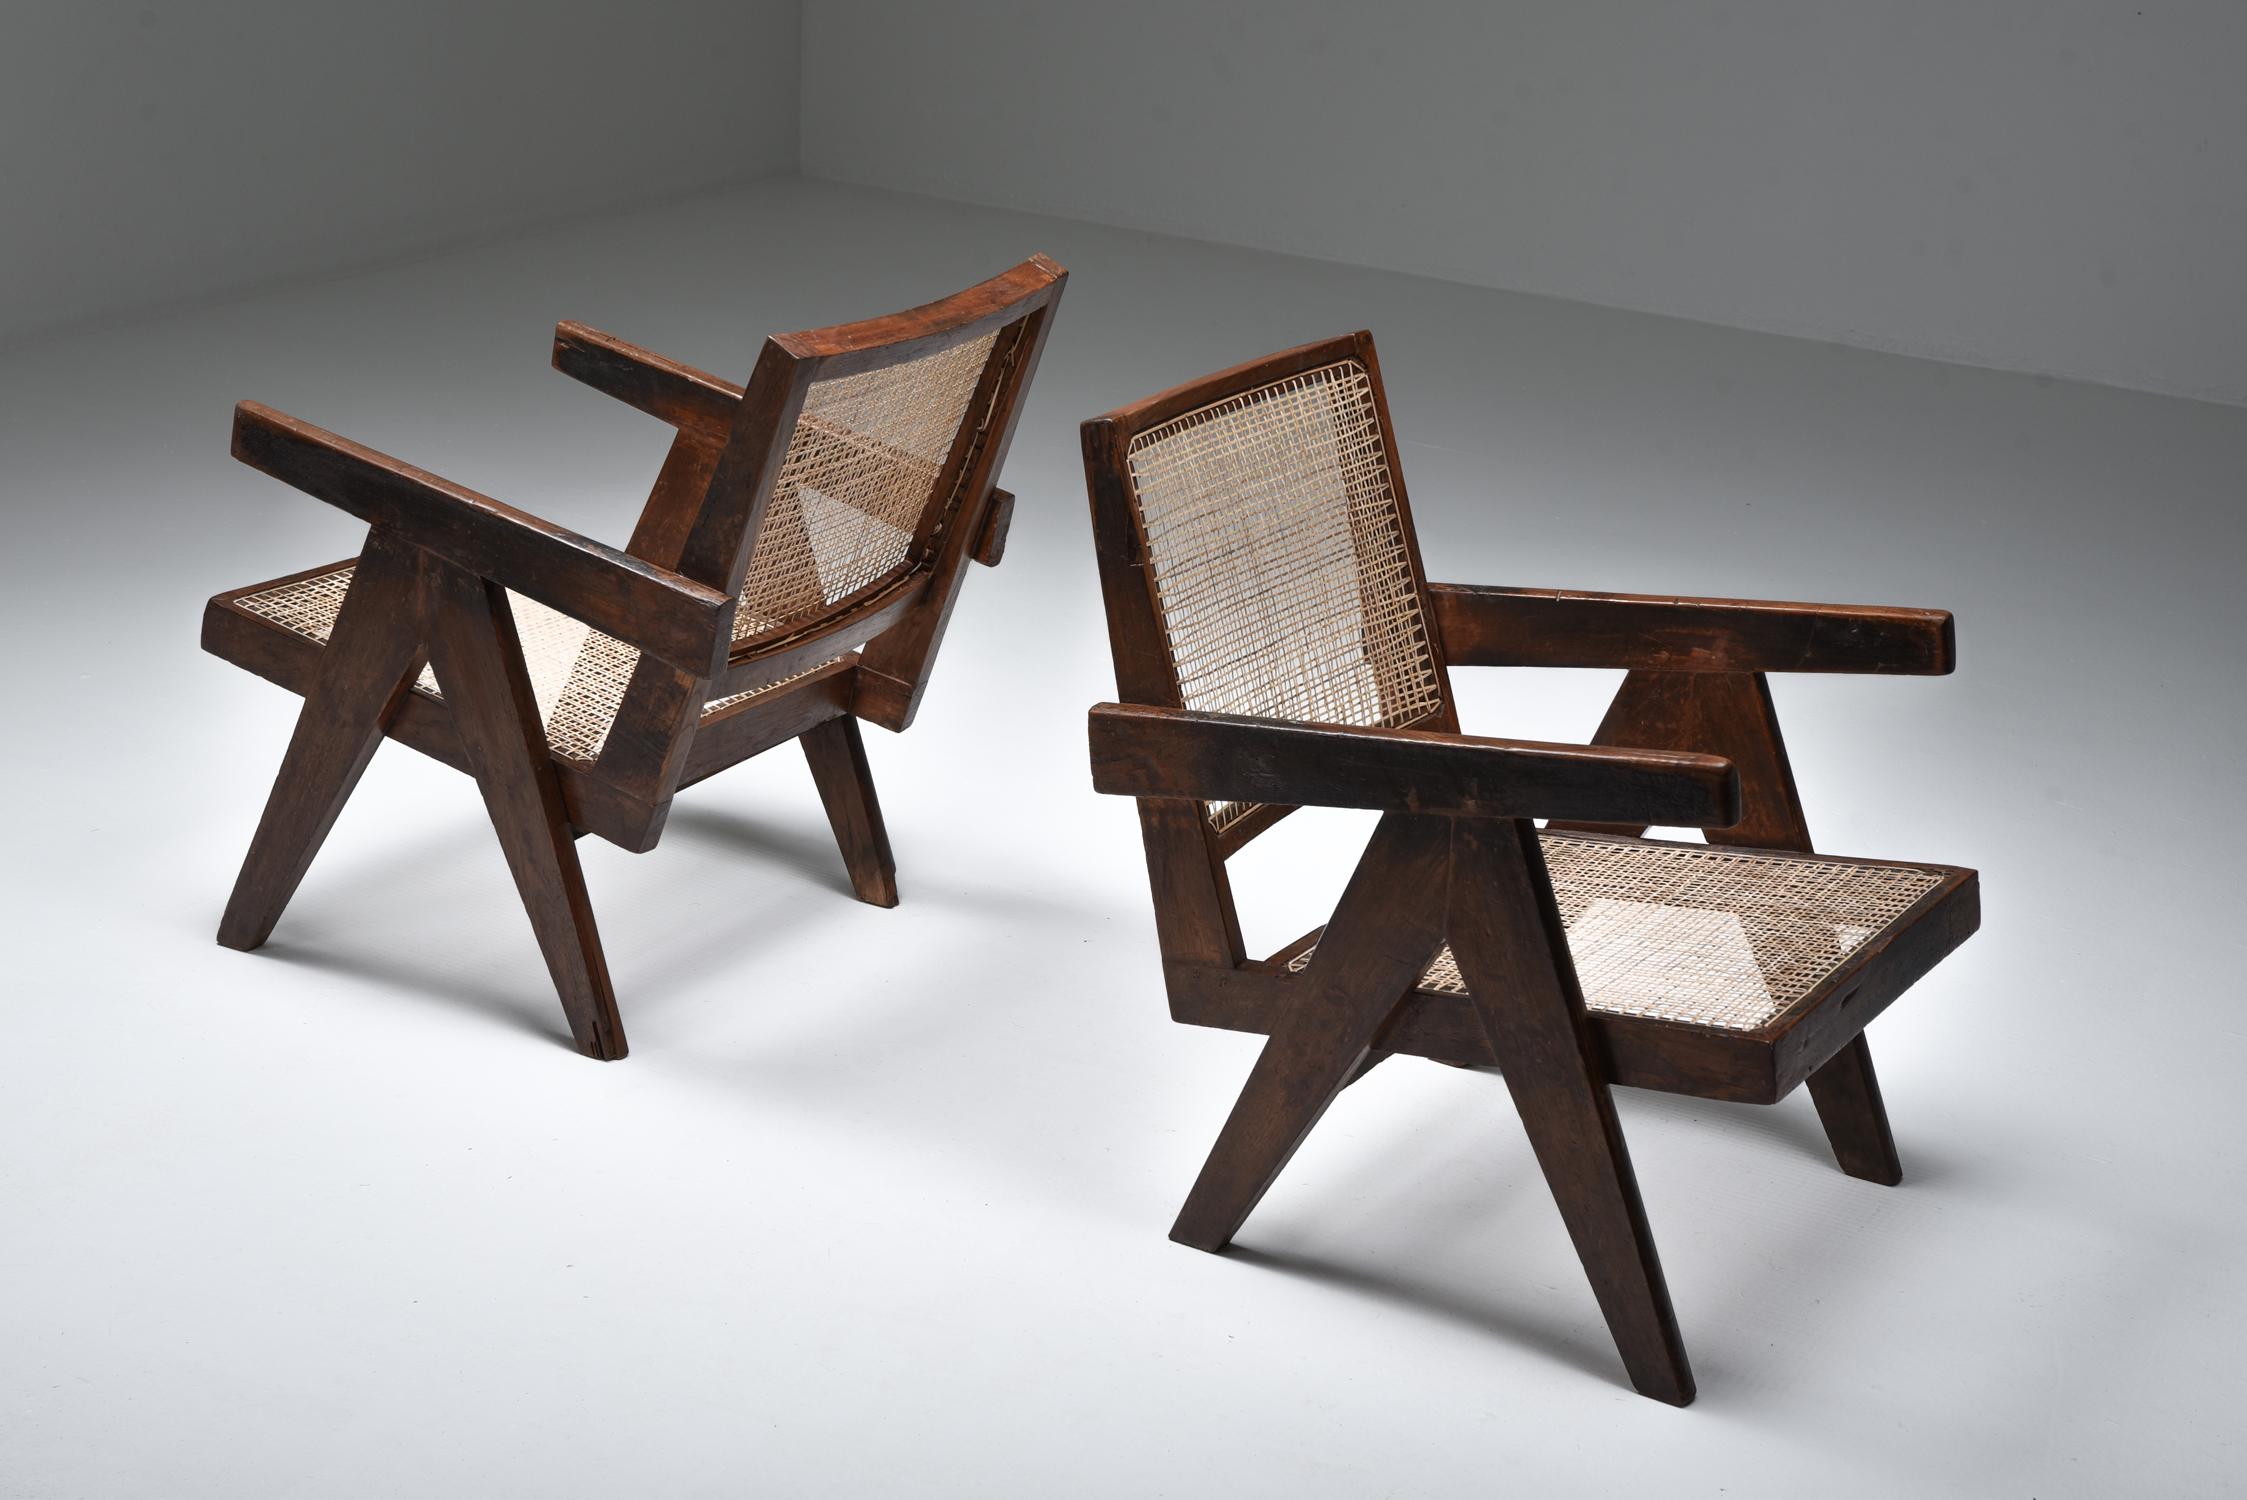 Pierre Jeanneret, armchairs, low easy chairs, for Administrative buildings form Chandigarh, India, 1960s.

authentic vintage piece in original condition with new cane seating.

Another interesting and nowadays relevant fact about these and other